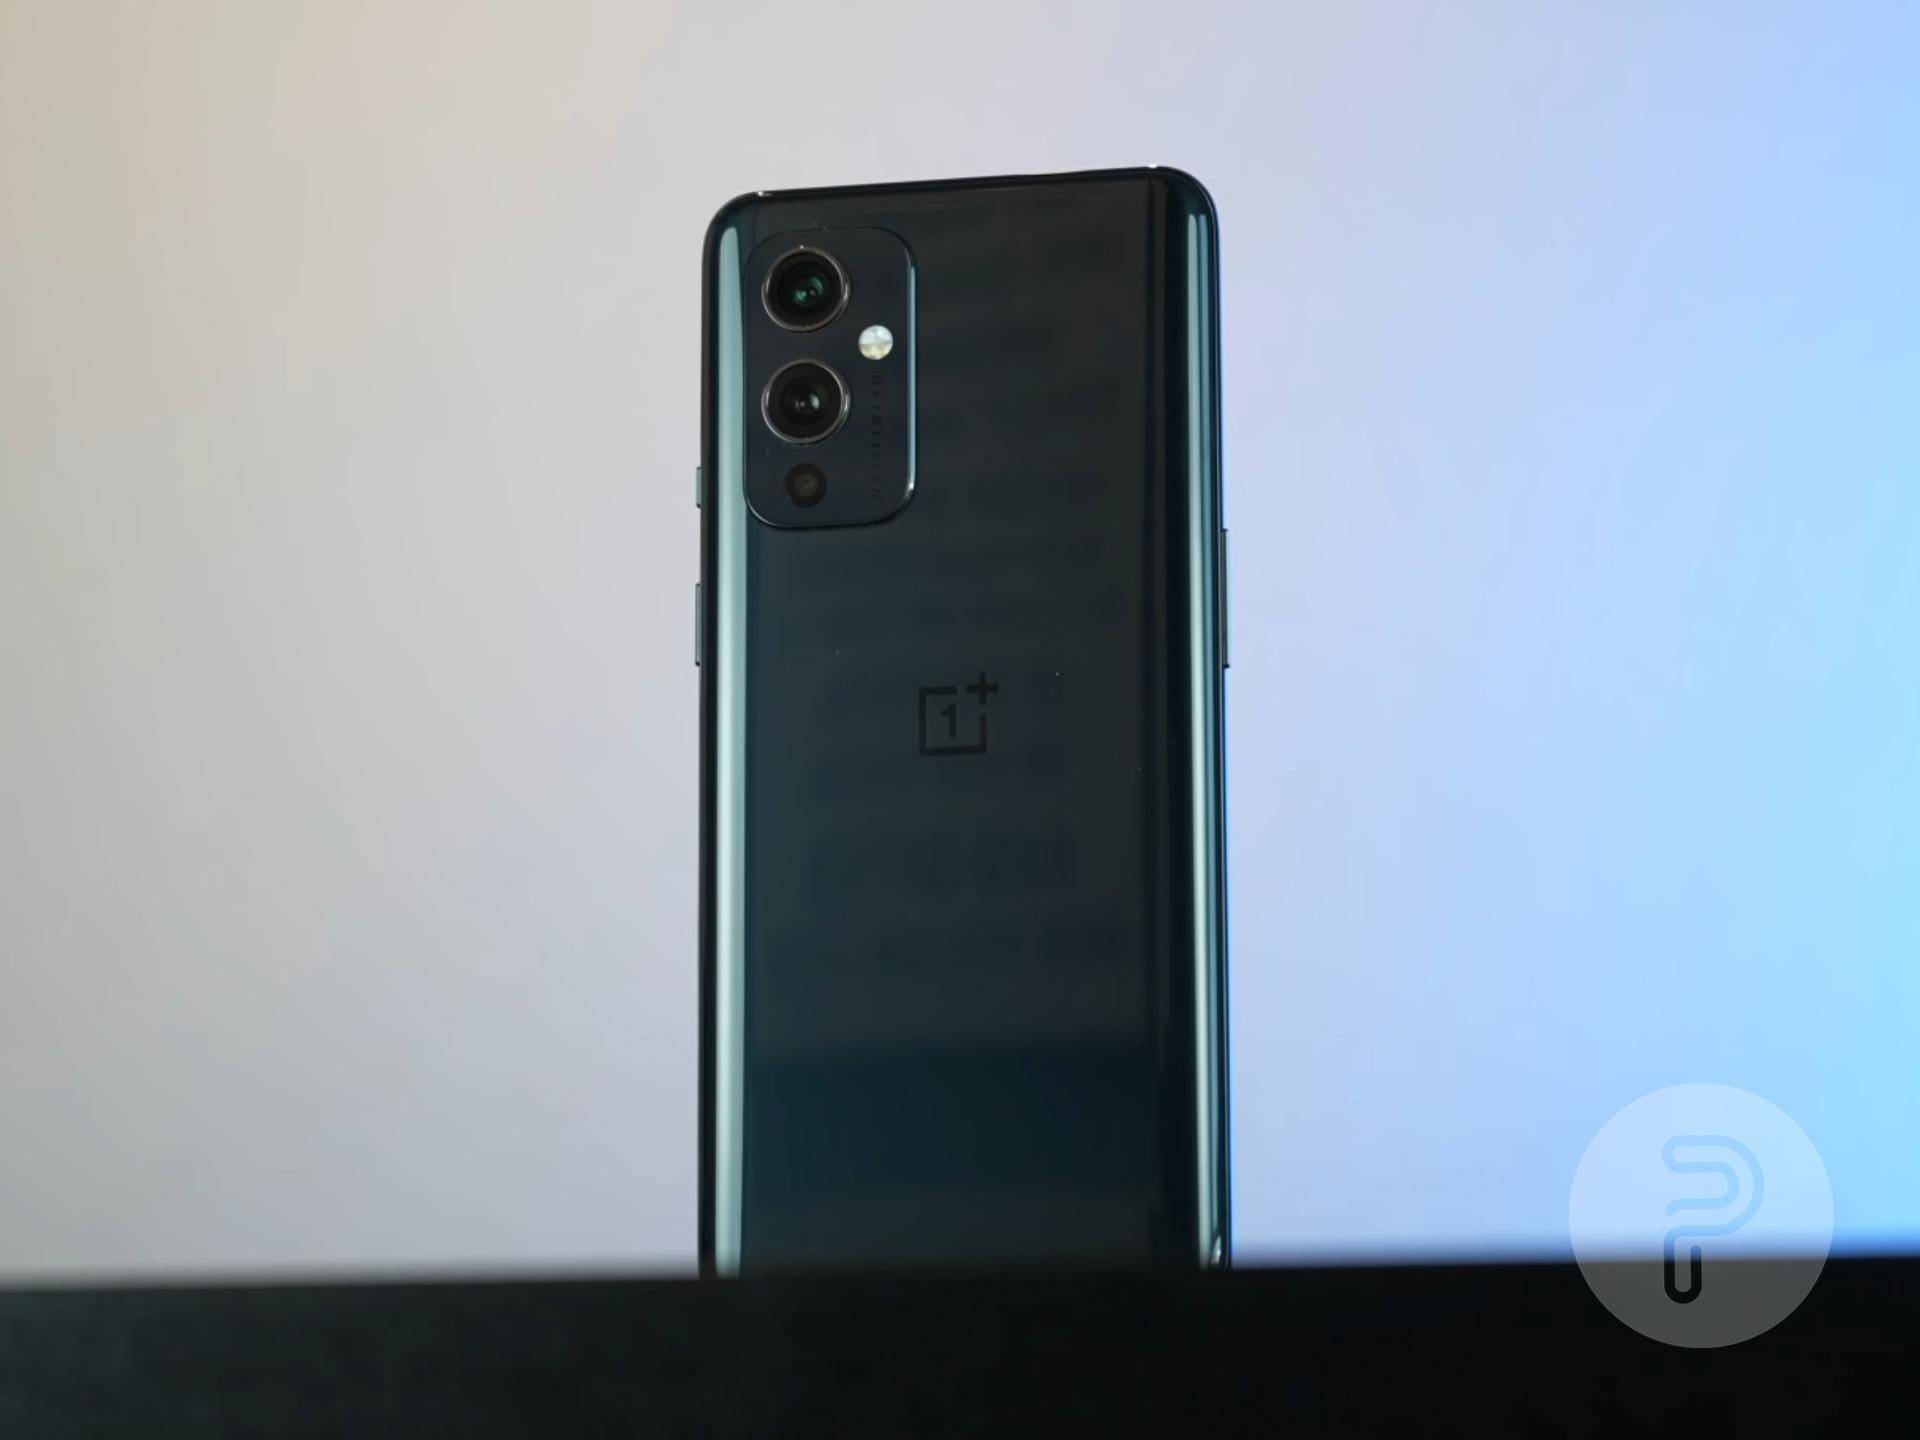 An image of the OnePlus 9 showing its back panel